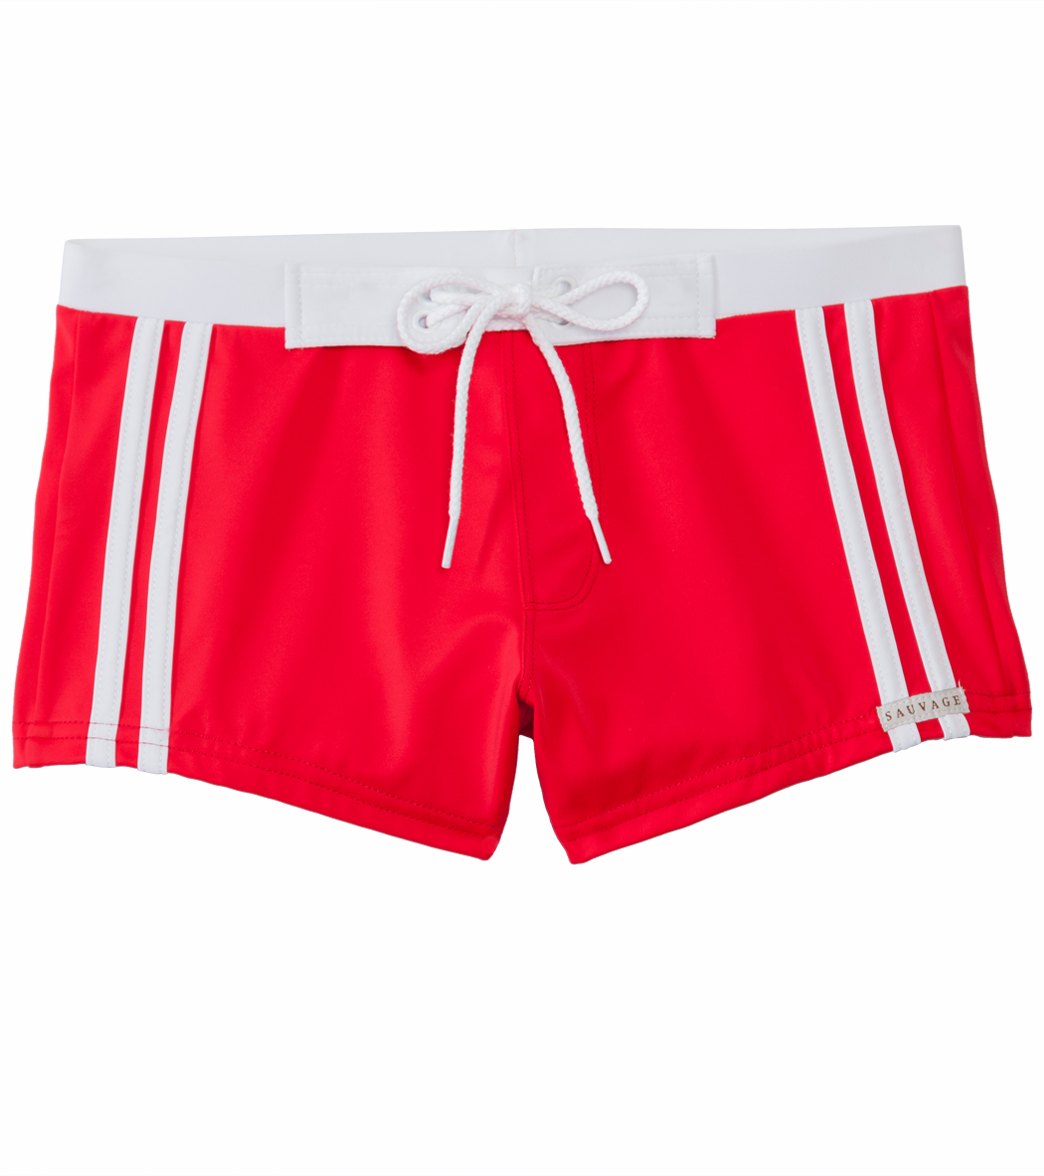 Sauvage Riviera Athletic Fit Swim Trunk - Red Xl - Swimoutlet.com